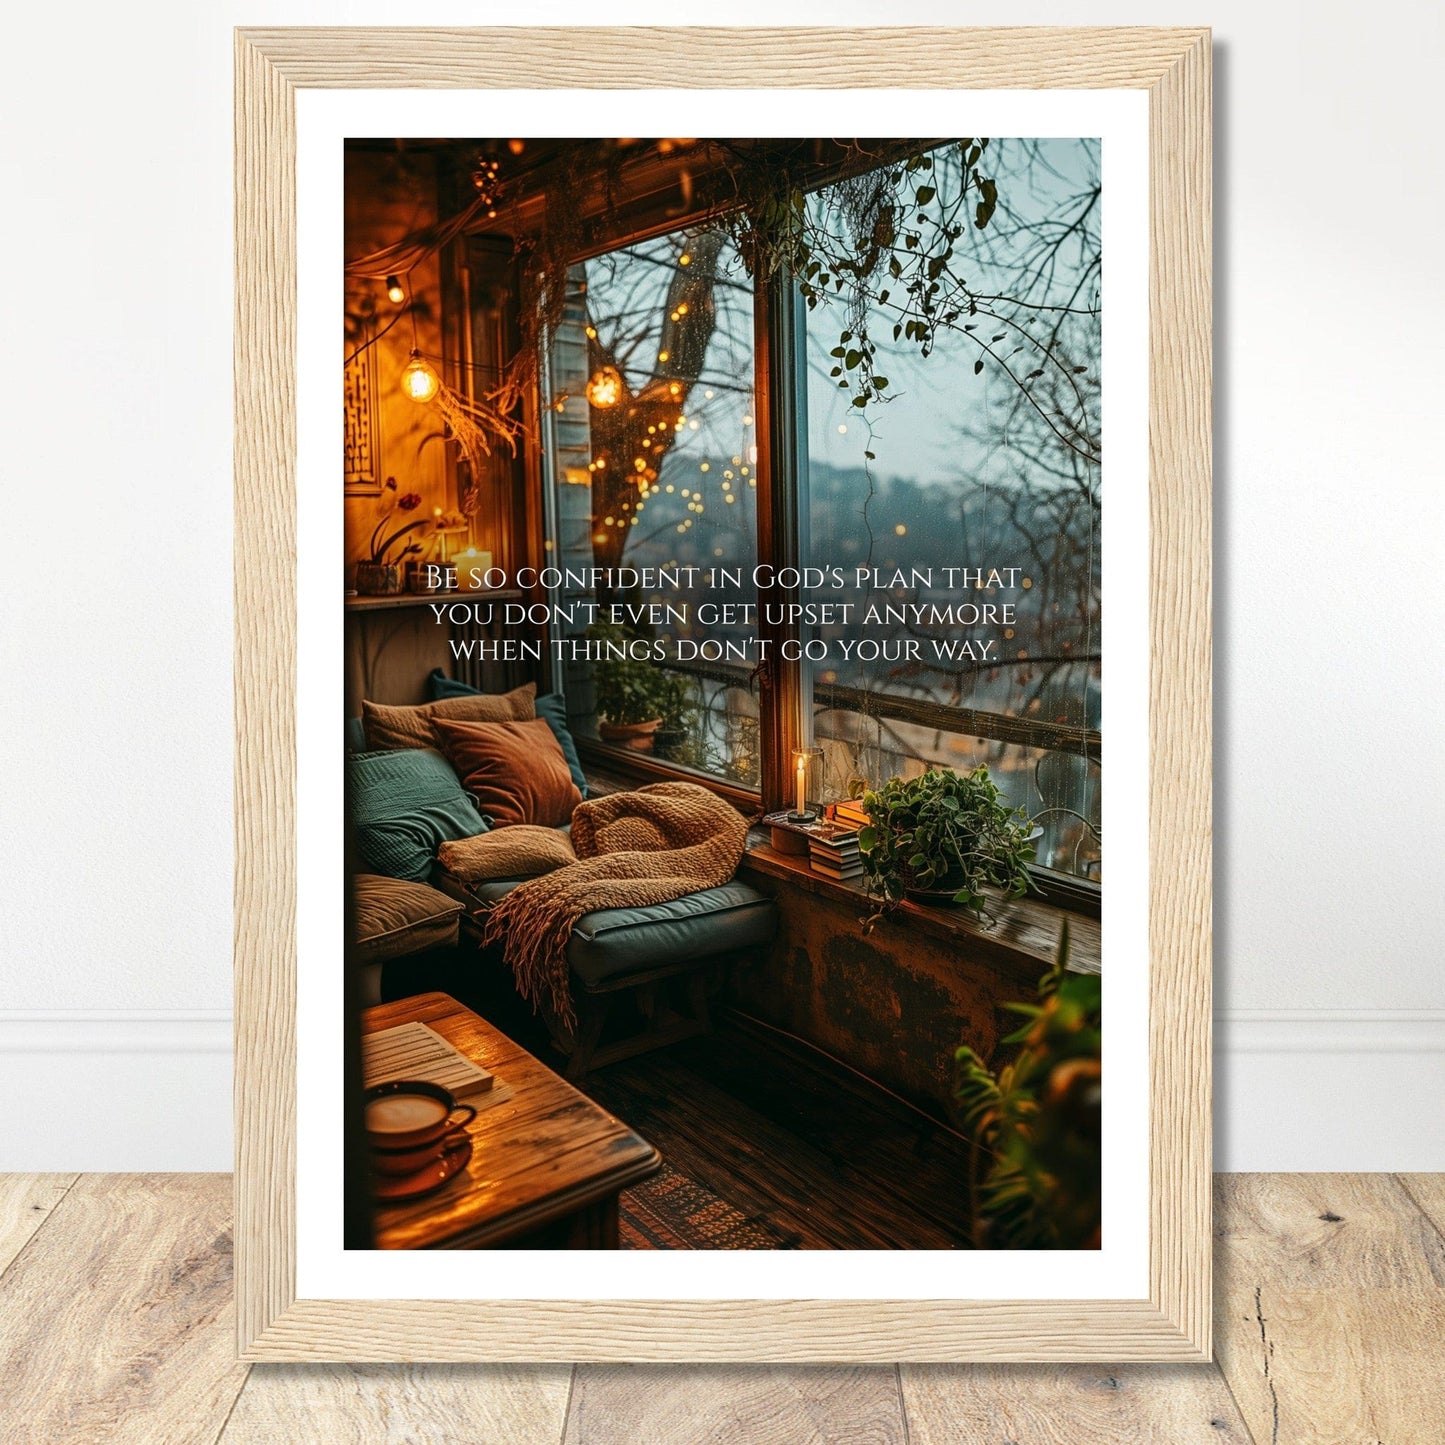 Coffee With My Father Print Material A4 21x29.7 cm / 8x12″ / Wood frame Premium Matte Paper Wooden Framed Poster